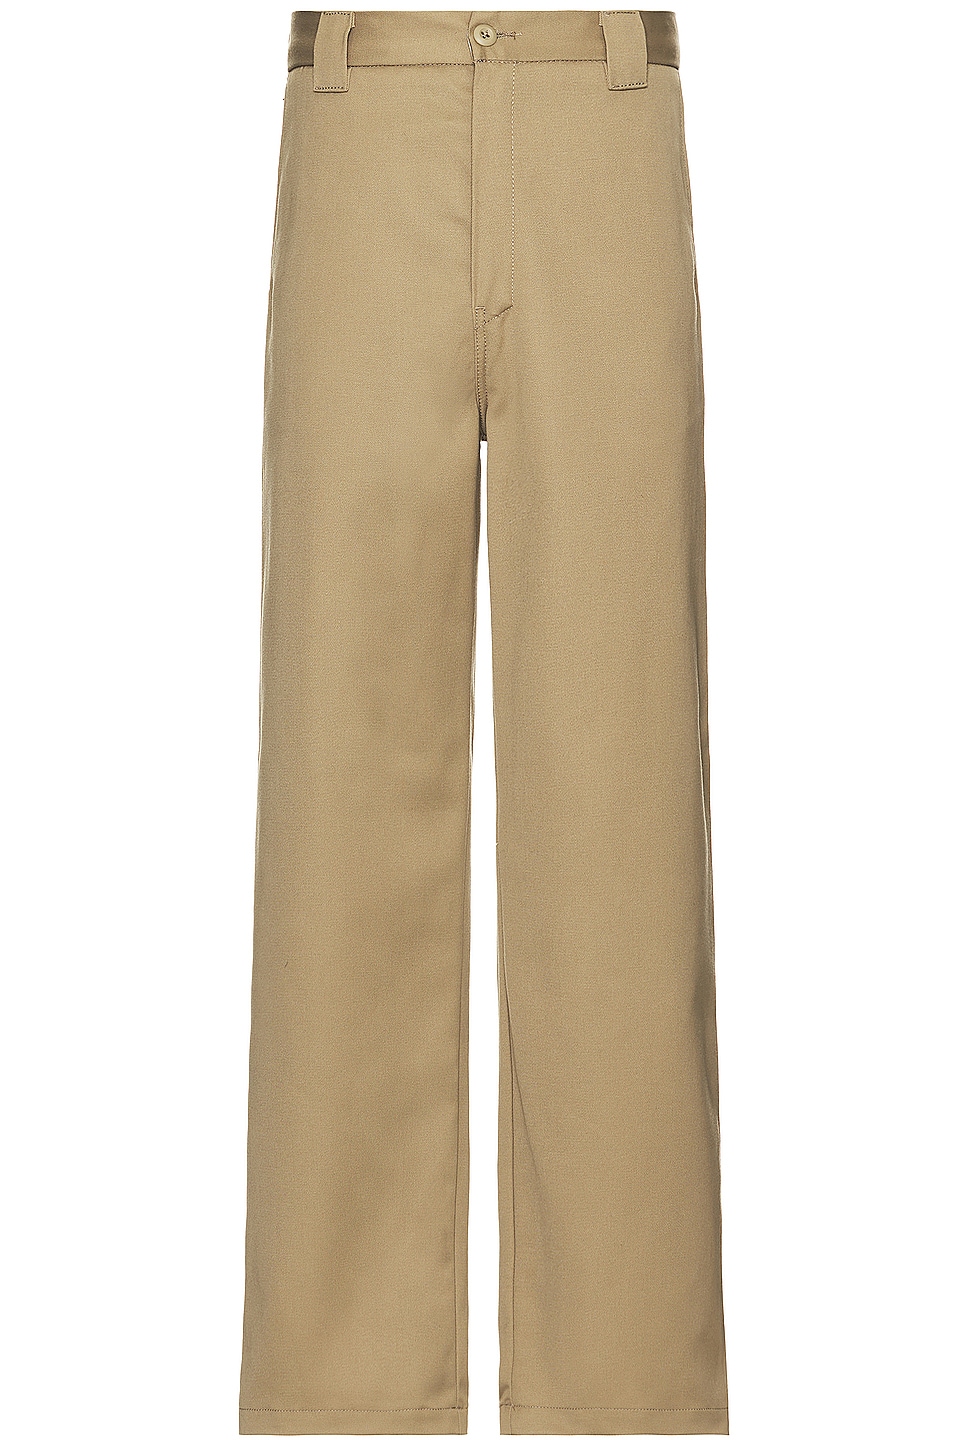 Image 1 of Carhartt WIP Brooker Pant in Leather Rigid